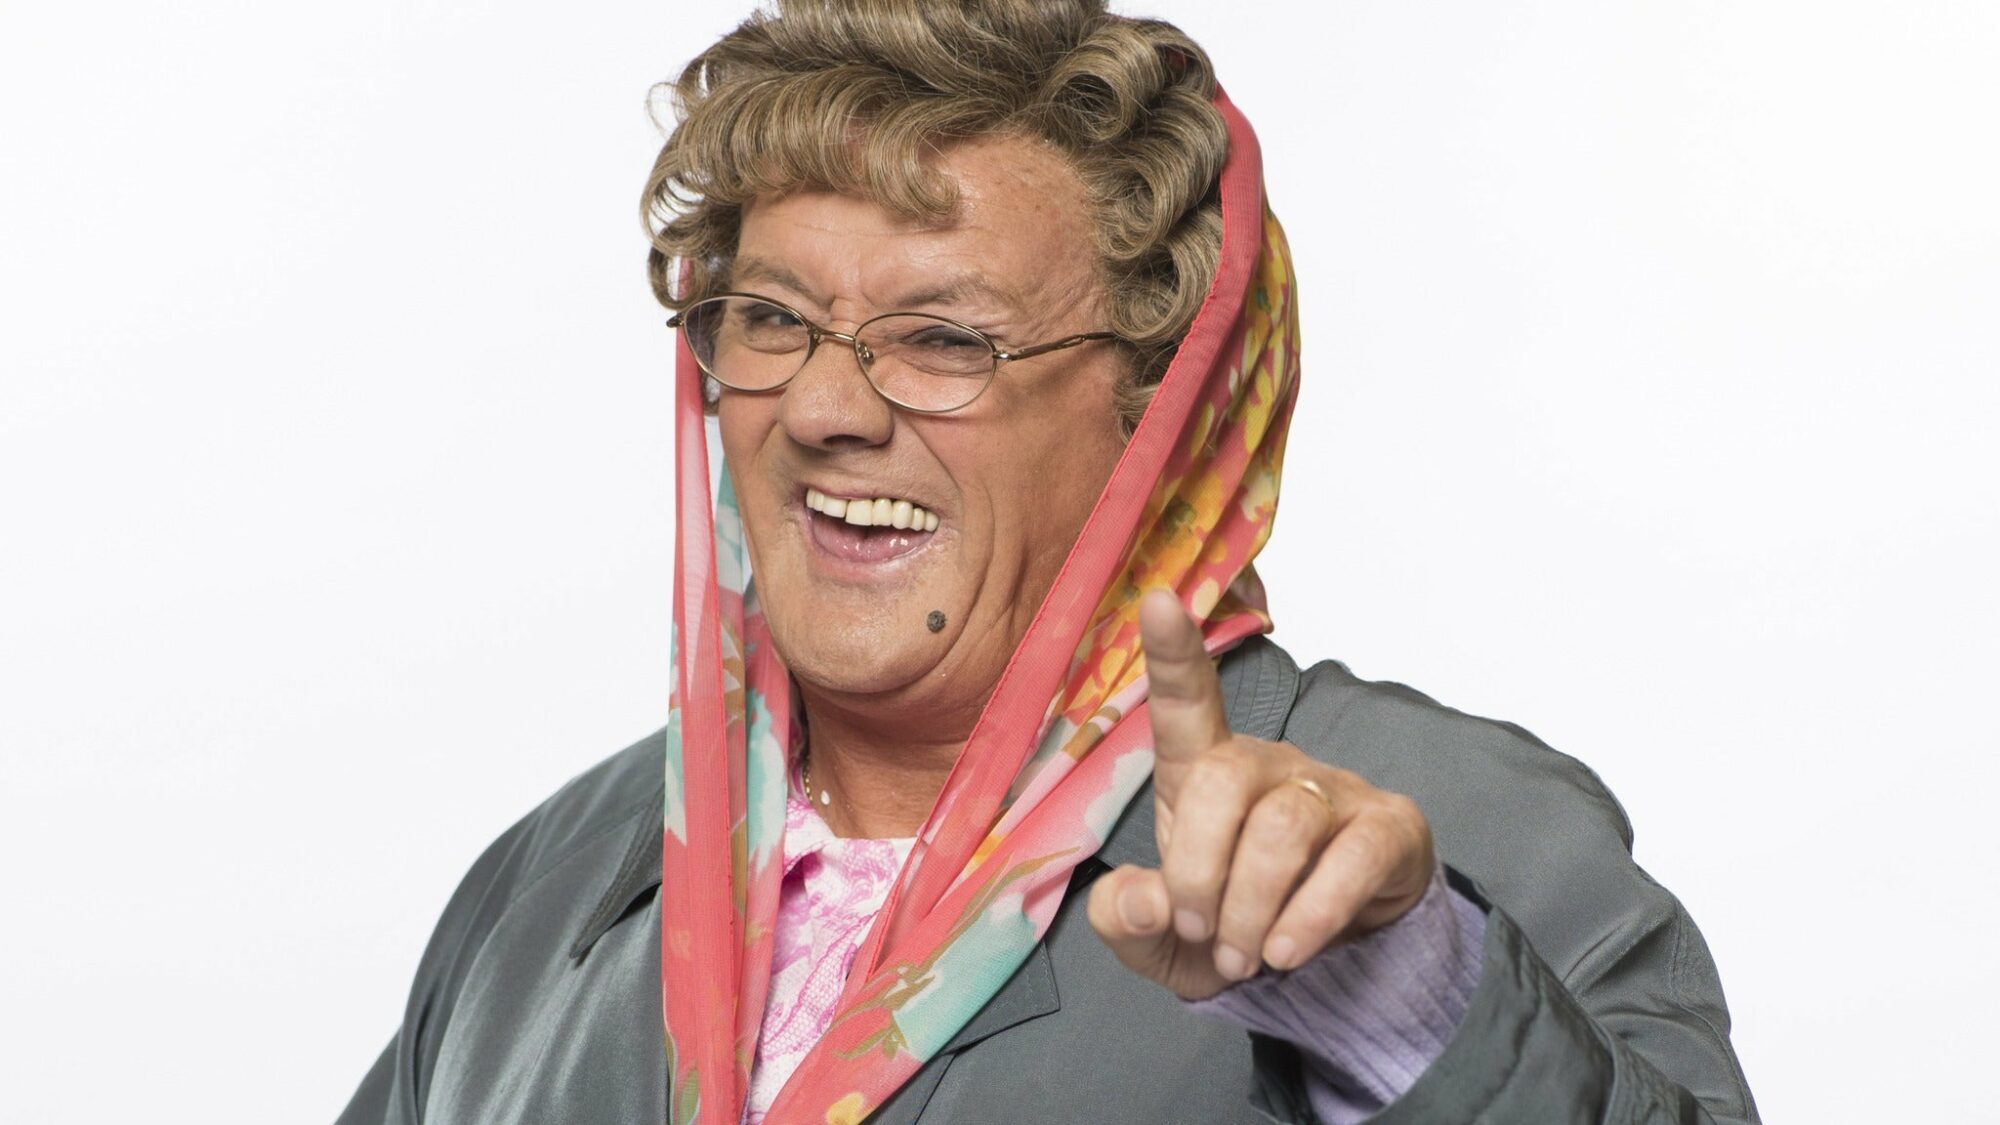 Mrs Brown's Boys - Mrs Brown Rides Again at Connexin Live, Hull | Arts ...